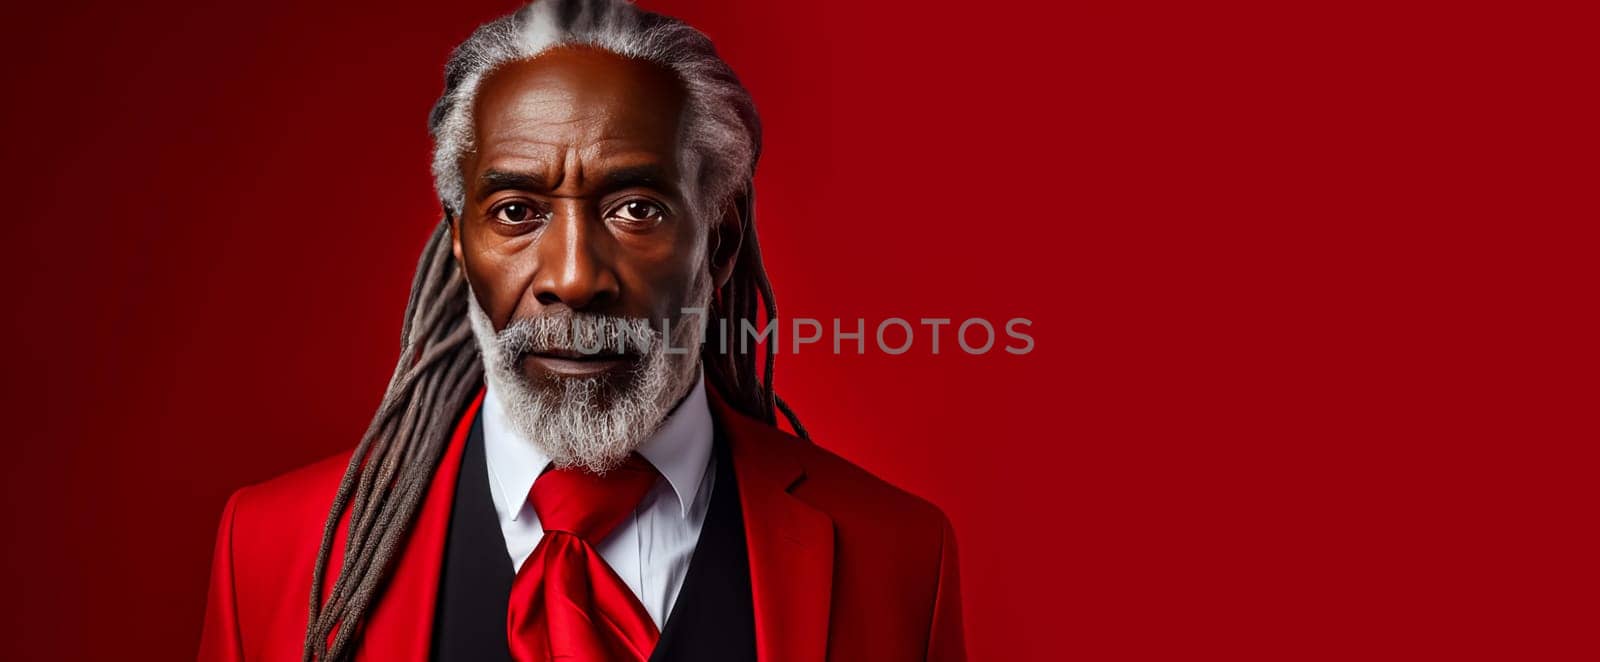 Handsome elderly black African American man with long dreadlocked hair, on a red background, banner. Advertising of cosmetic products, spa treatments, shampoos and hair care products, dentistry and medicine, perfumes and cosmetology for senior men.